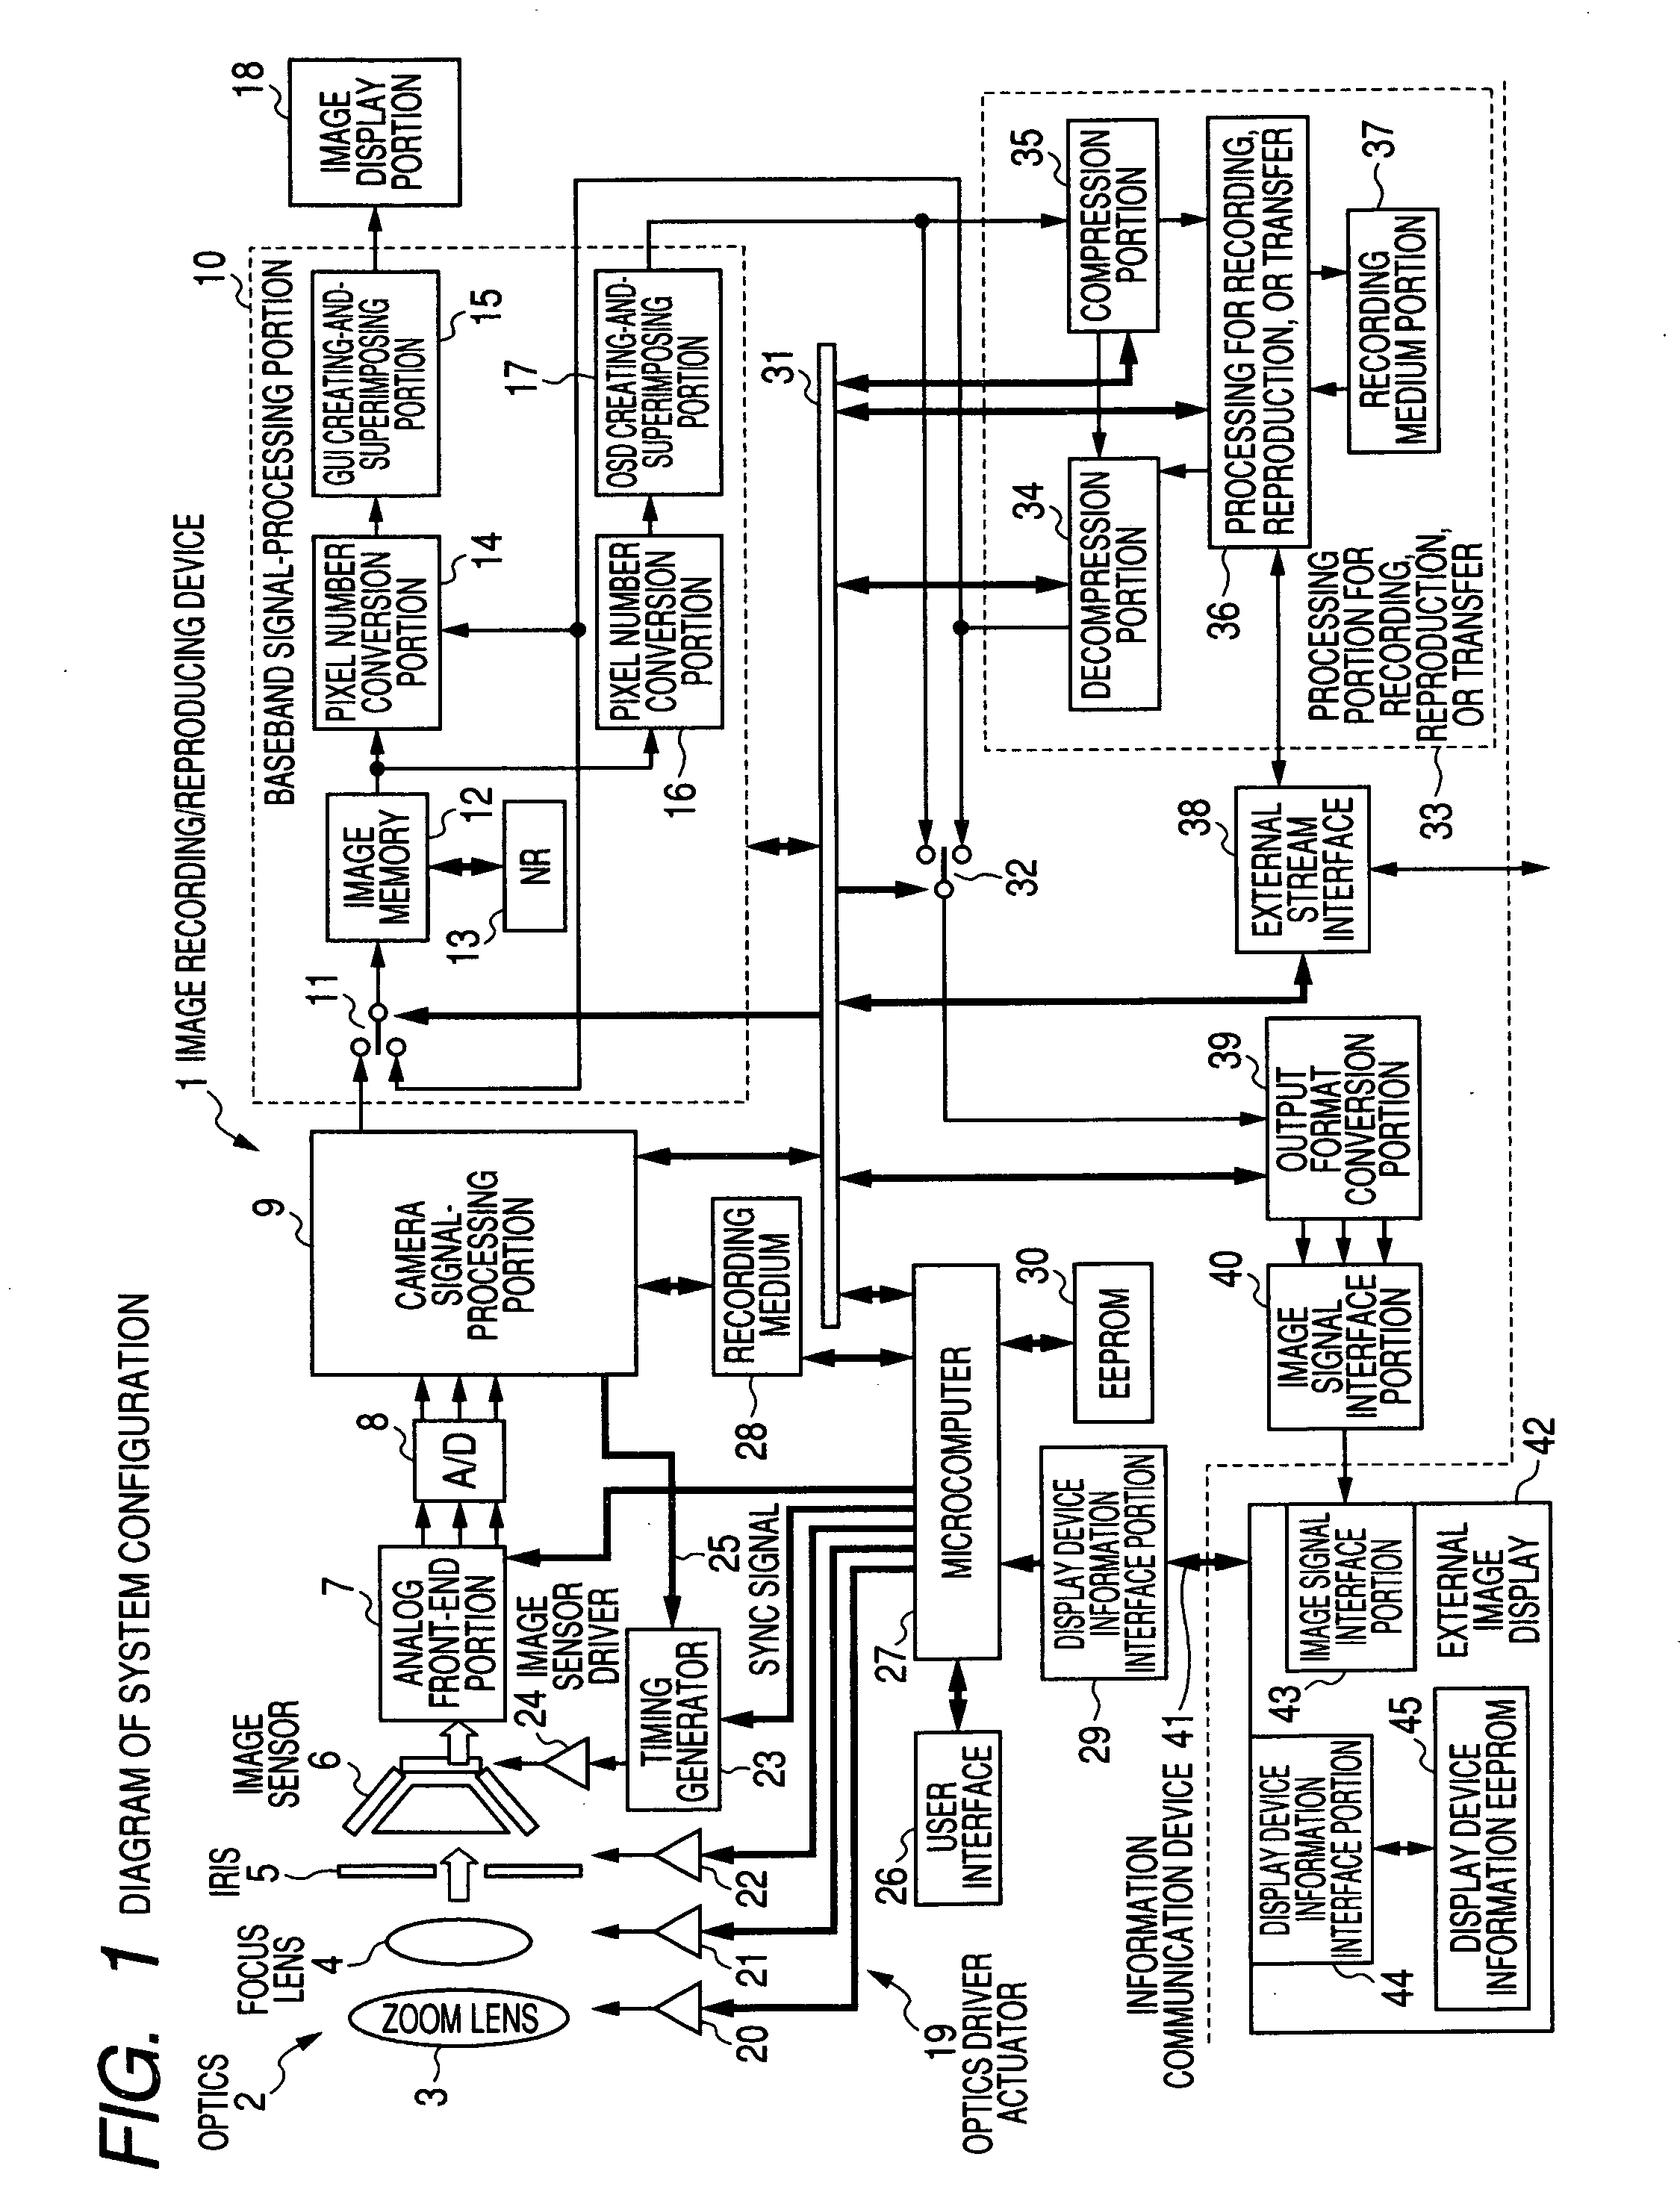 Image signal processing apparatus, method of image signal processing, and image signal processing system